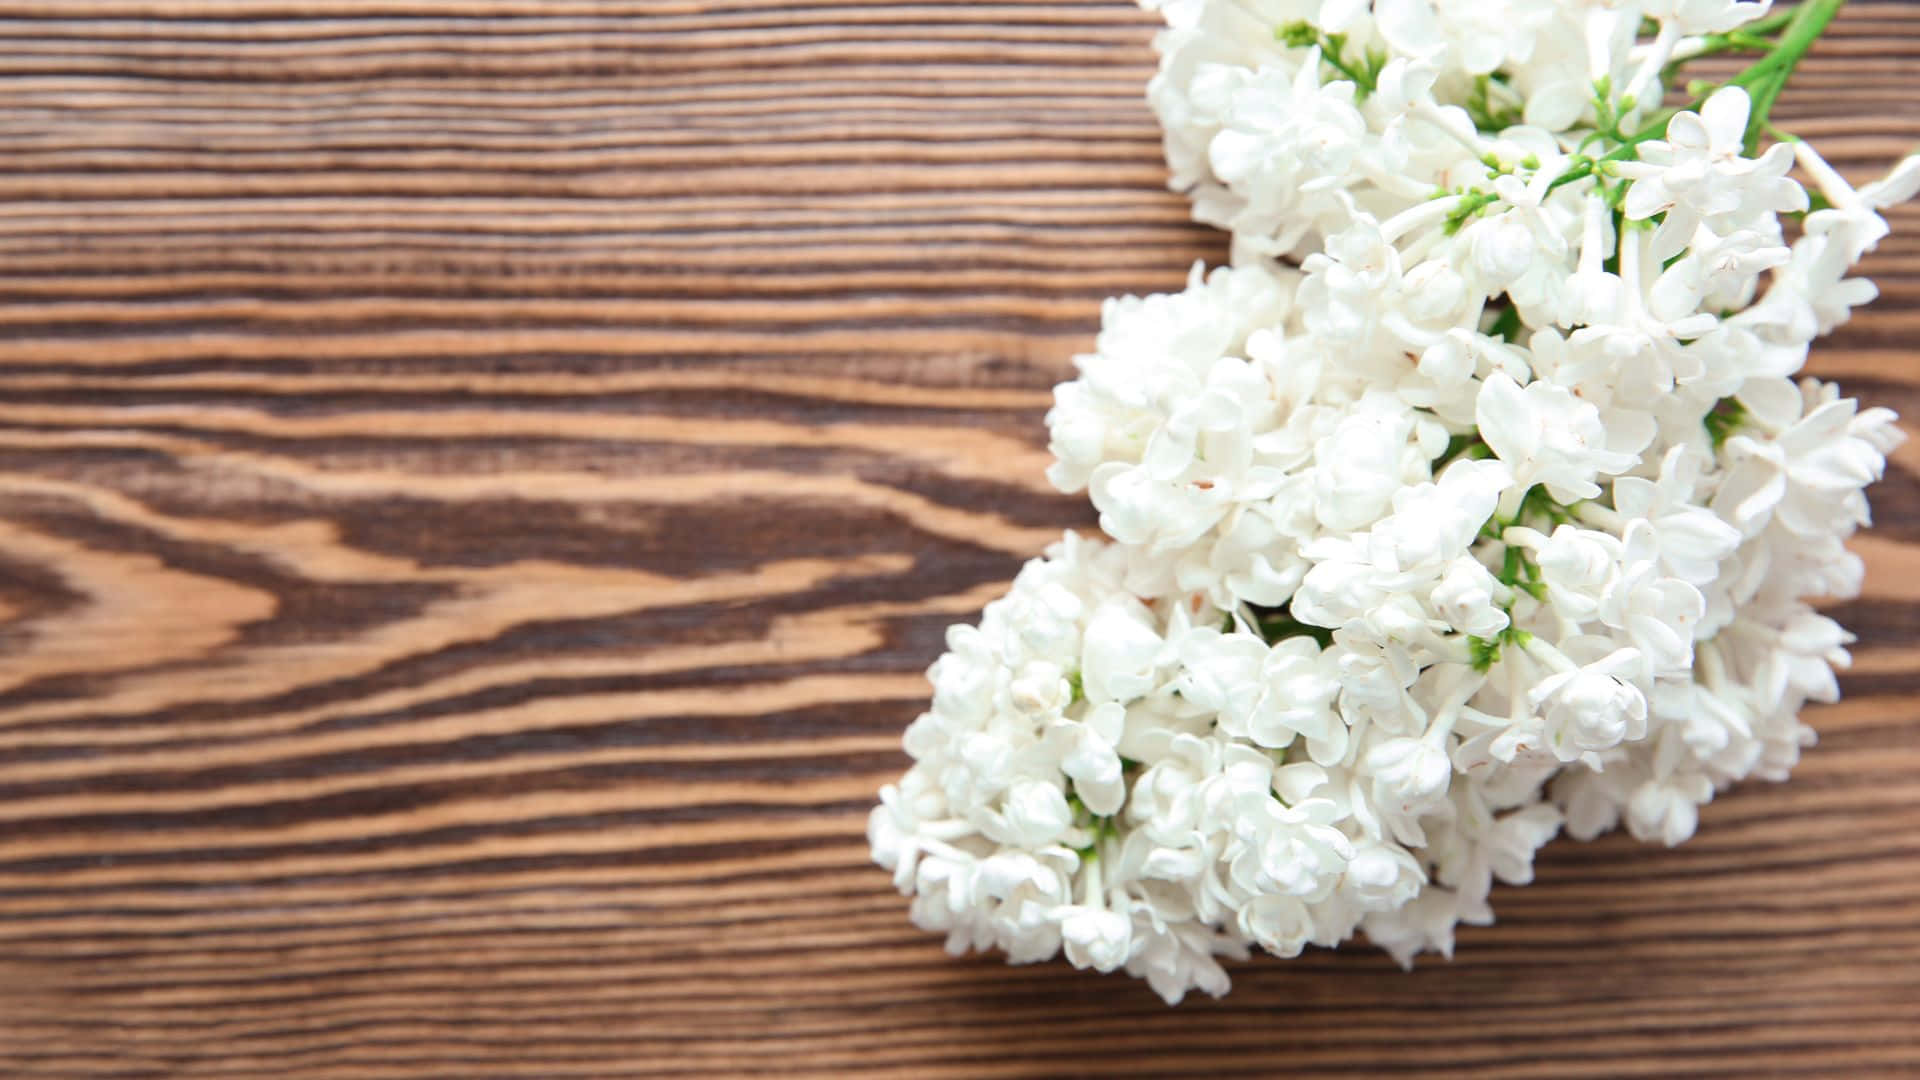 White Lilac Flowers On A Wooden Table